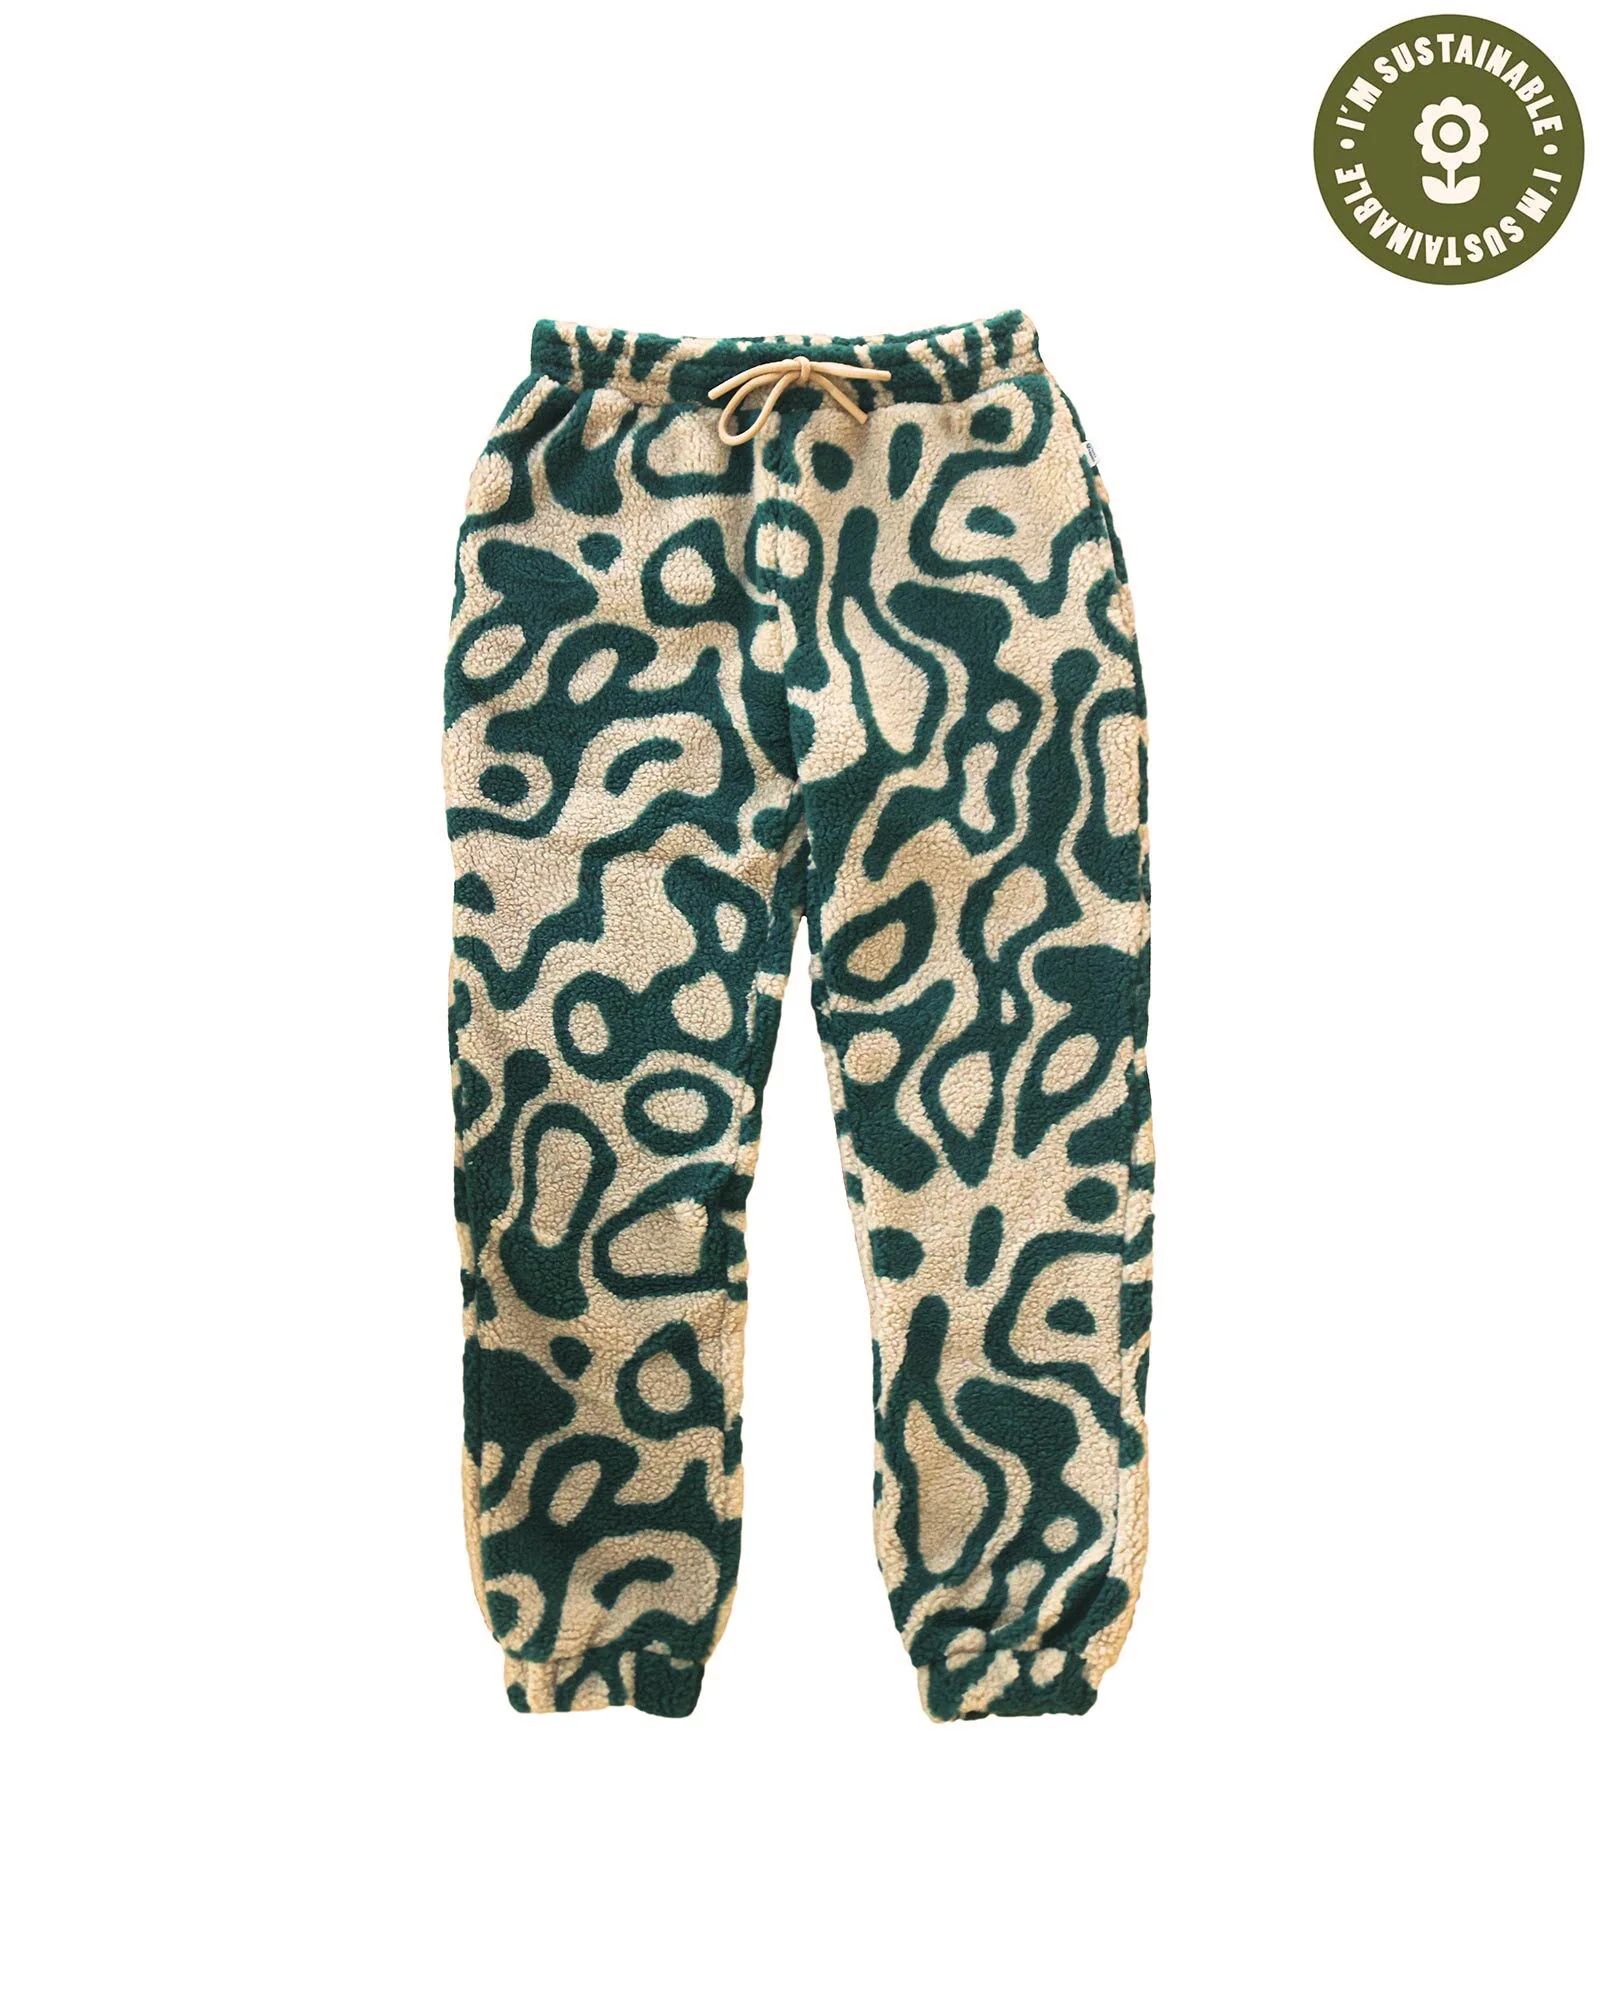 Yellowstone Geysers High Pile Fleece Jogger | Parks Project